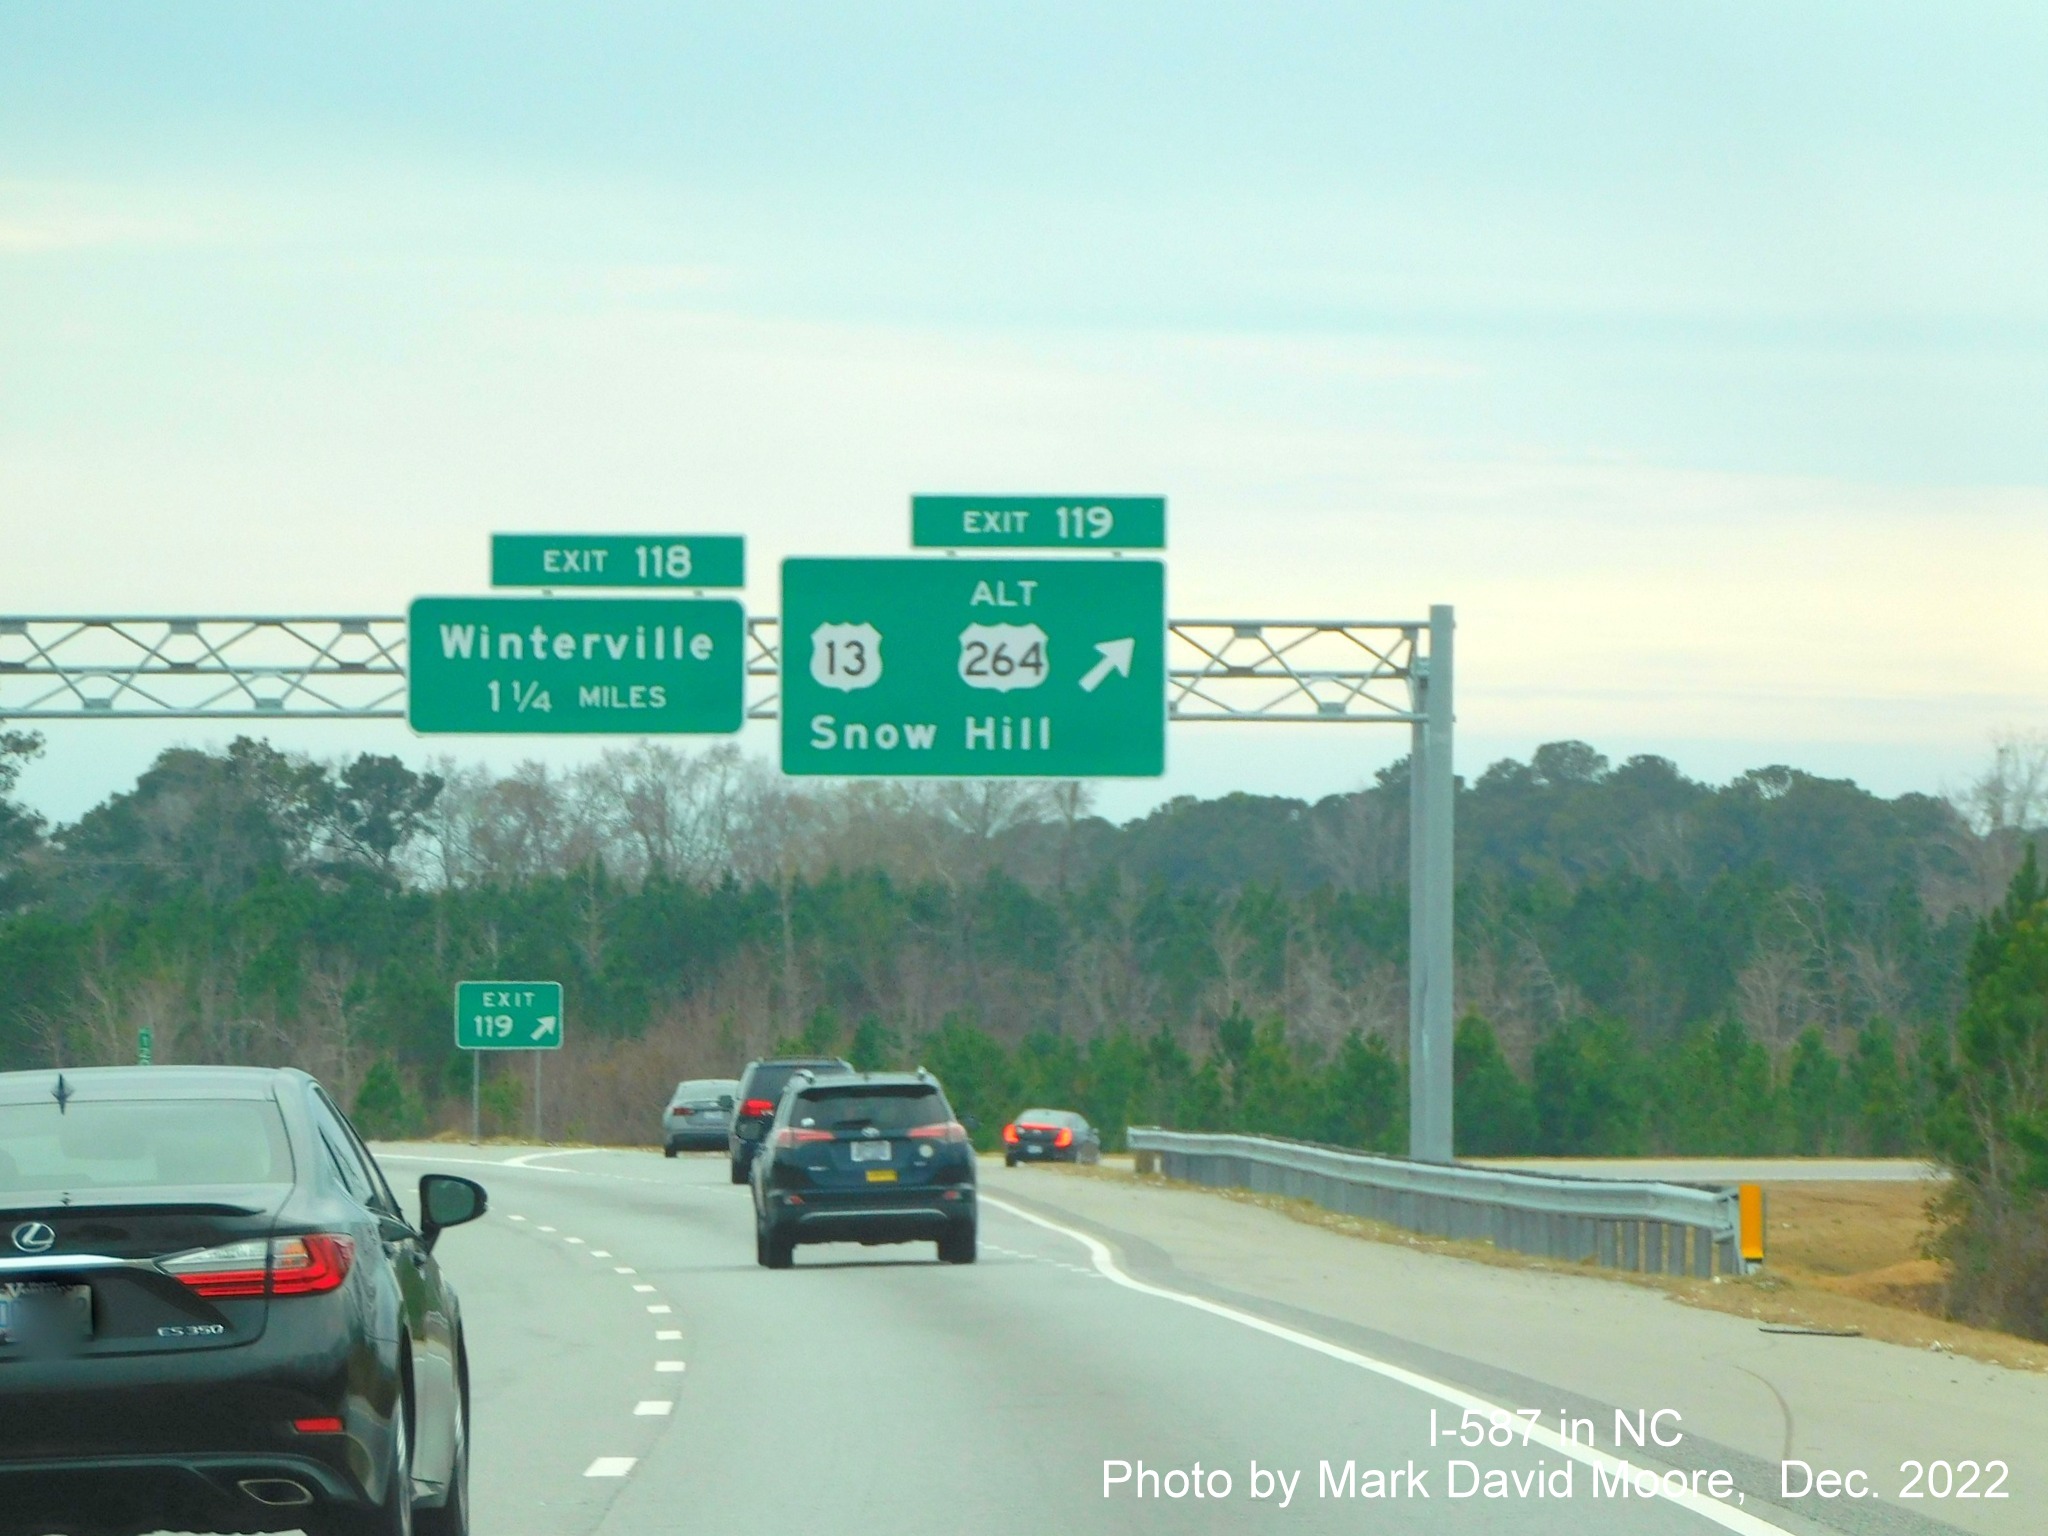 Image of ground mounted 1/2 mile advance sign for I-587 West exit on US 264 East/NC 11 Bypass South in Greenville, photo by Mark David Moore, December 2022